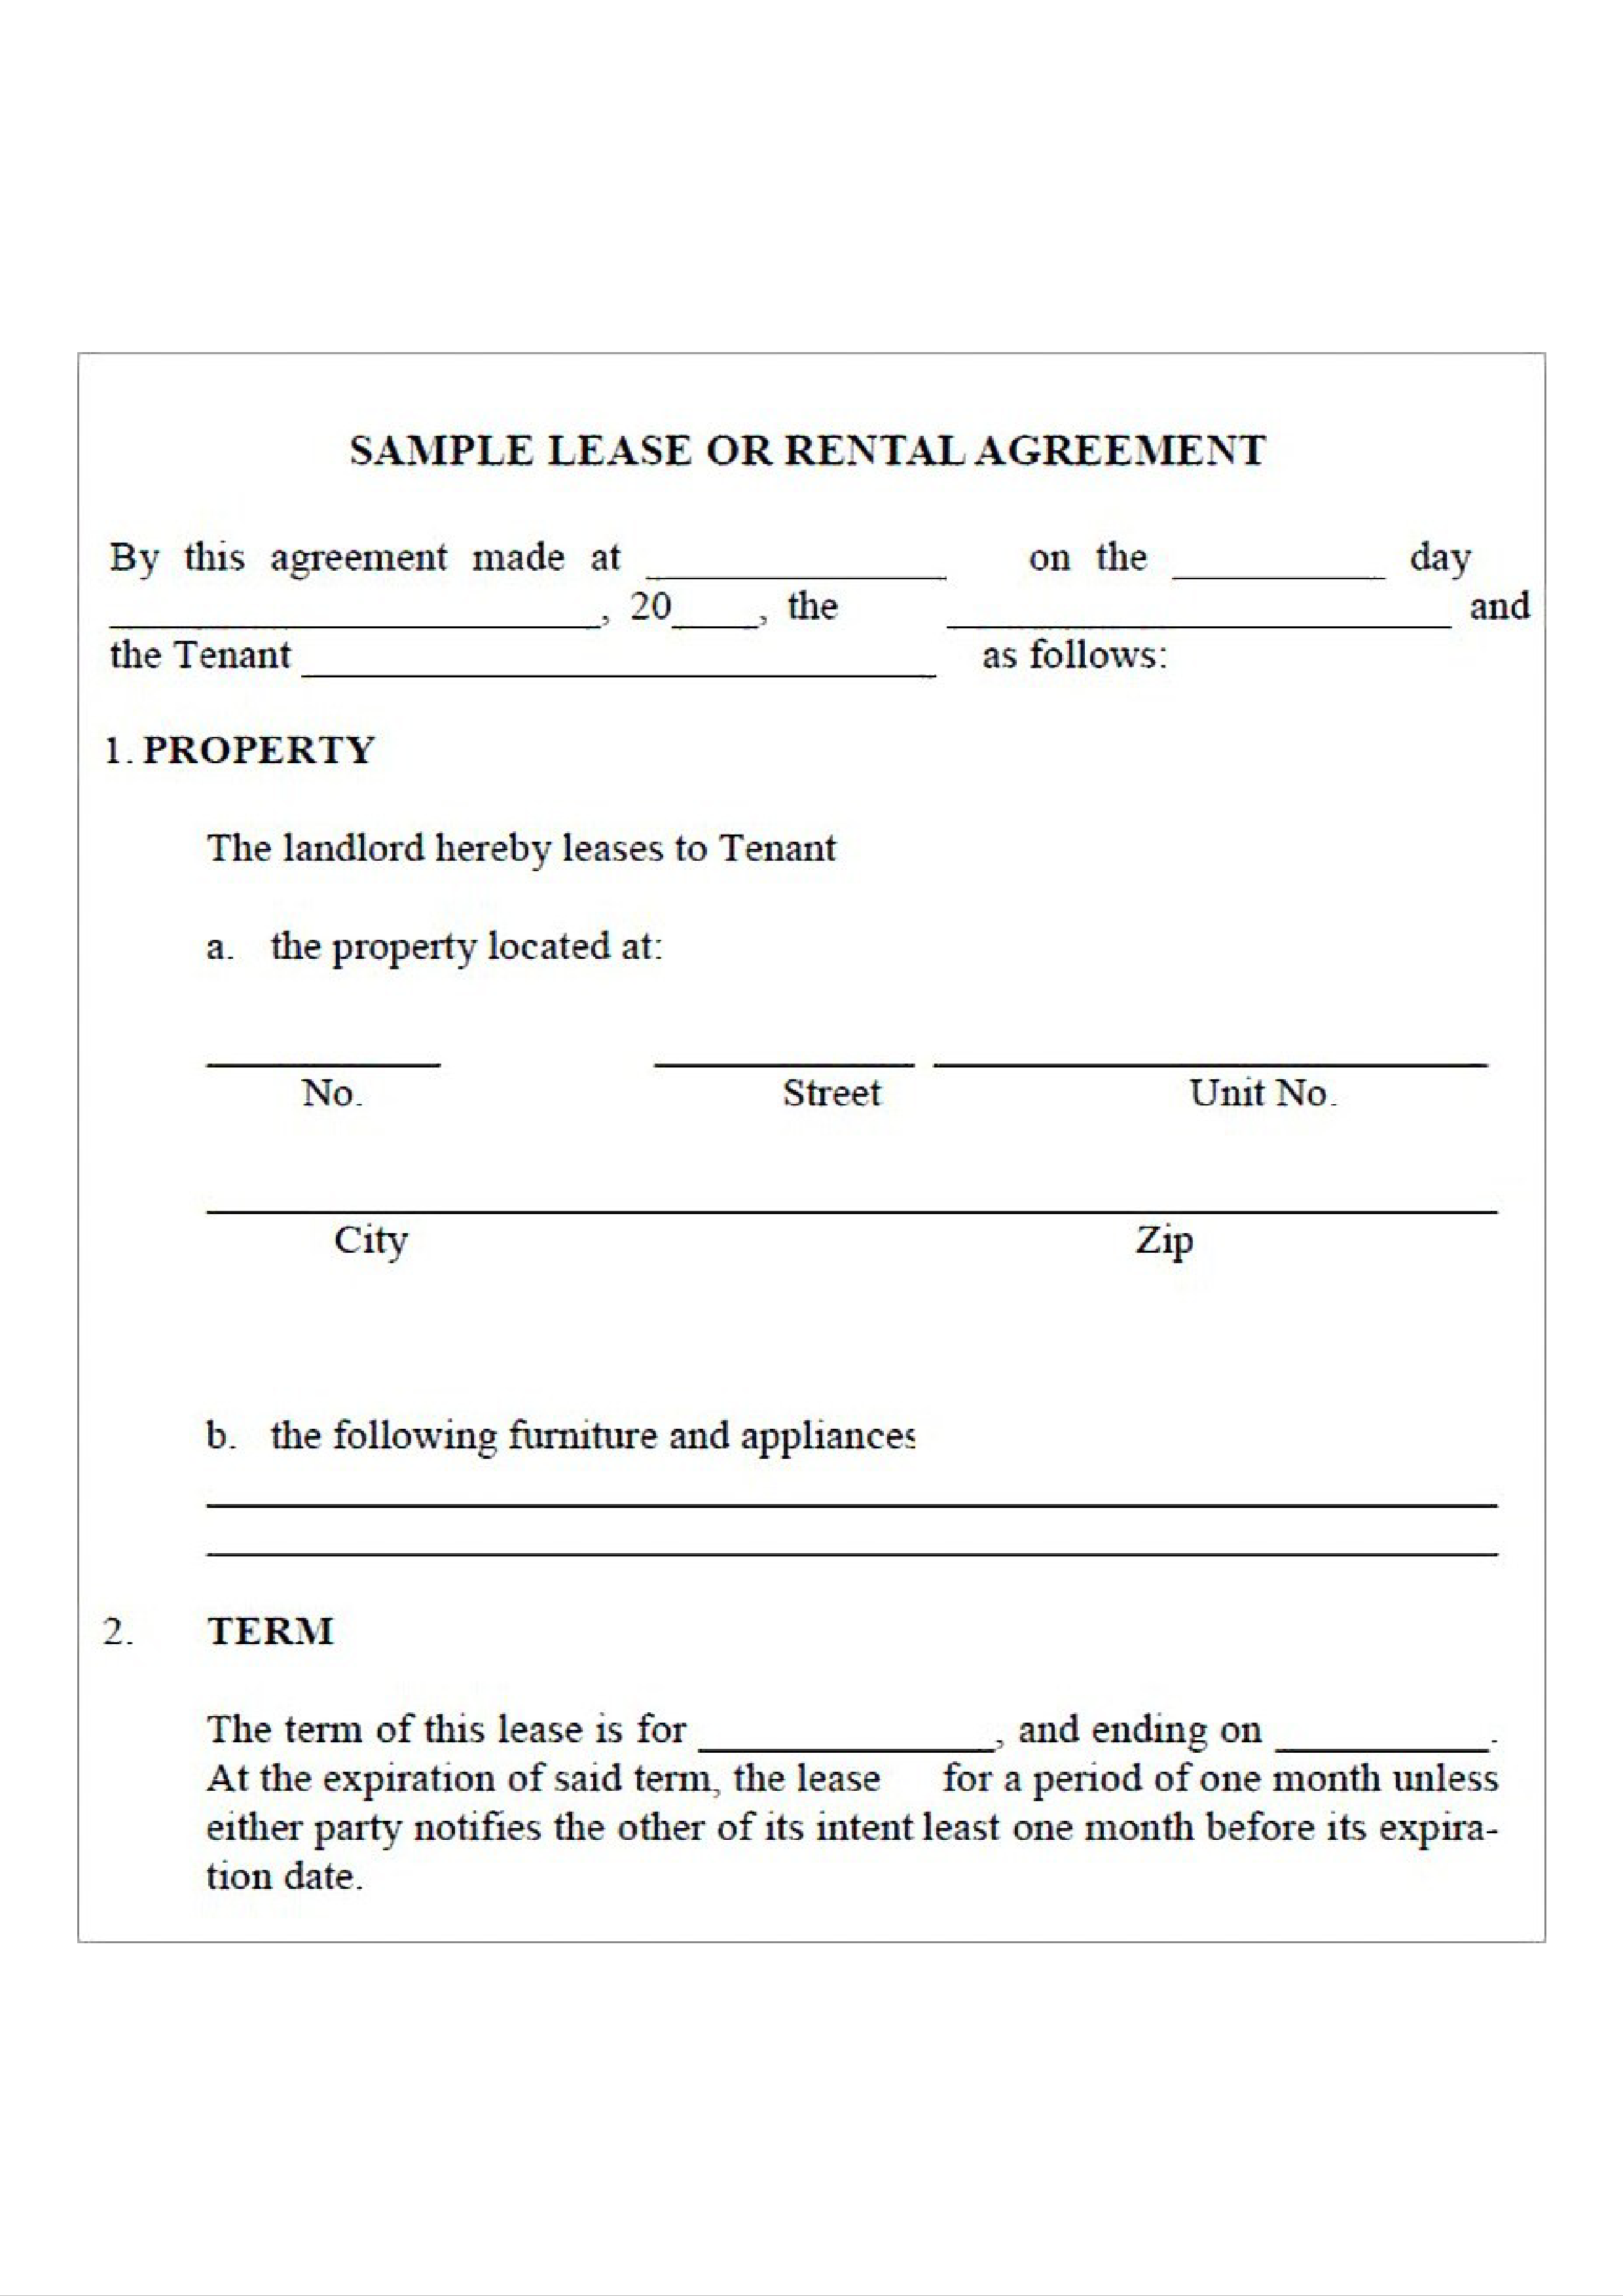 can i write my own lease agreement